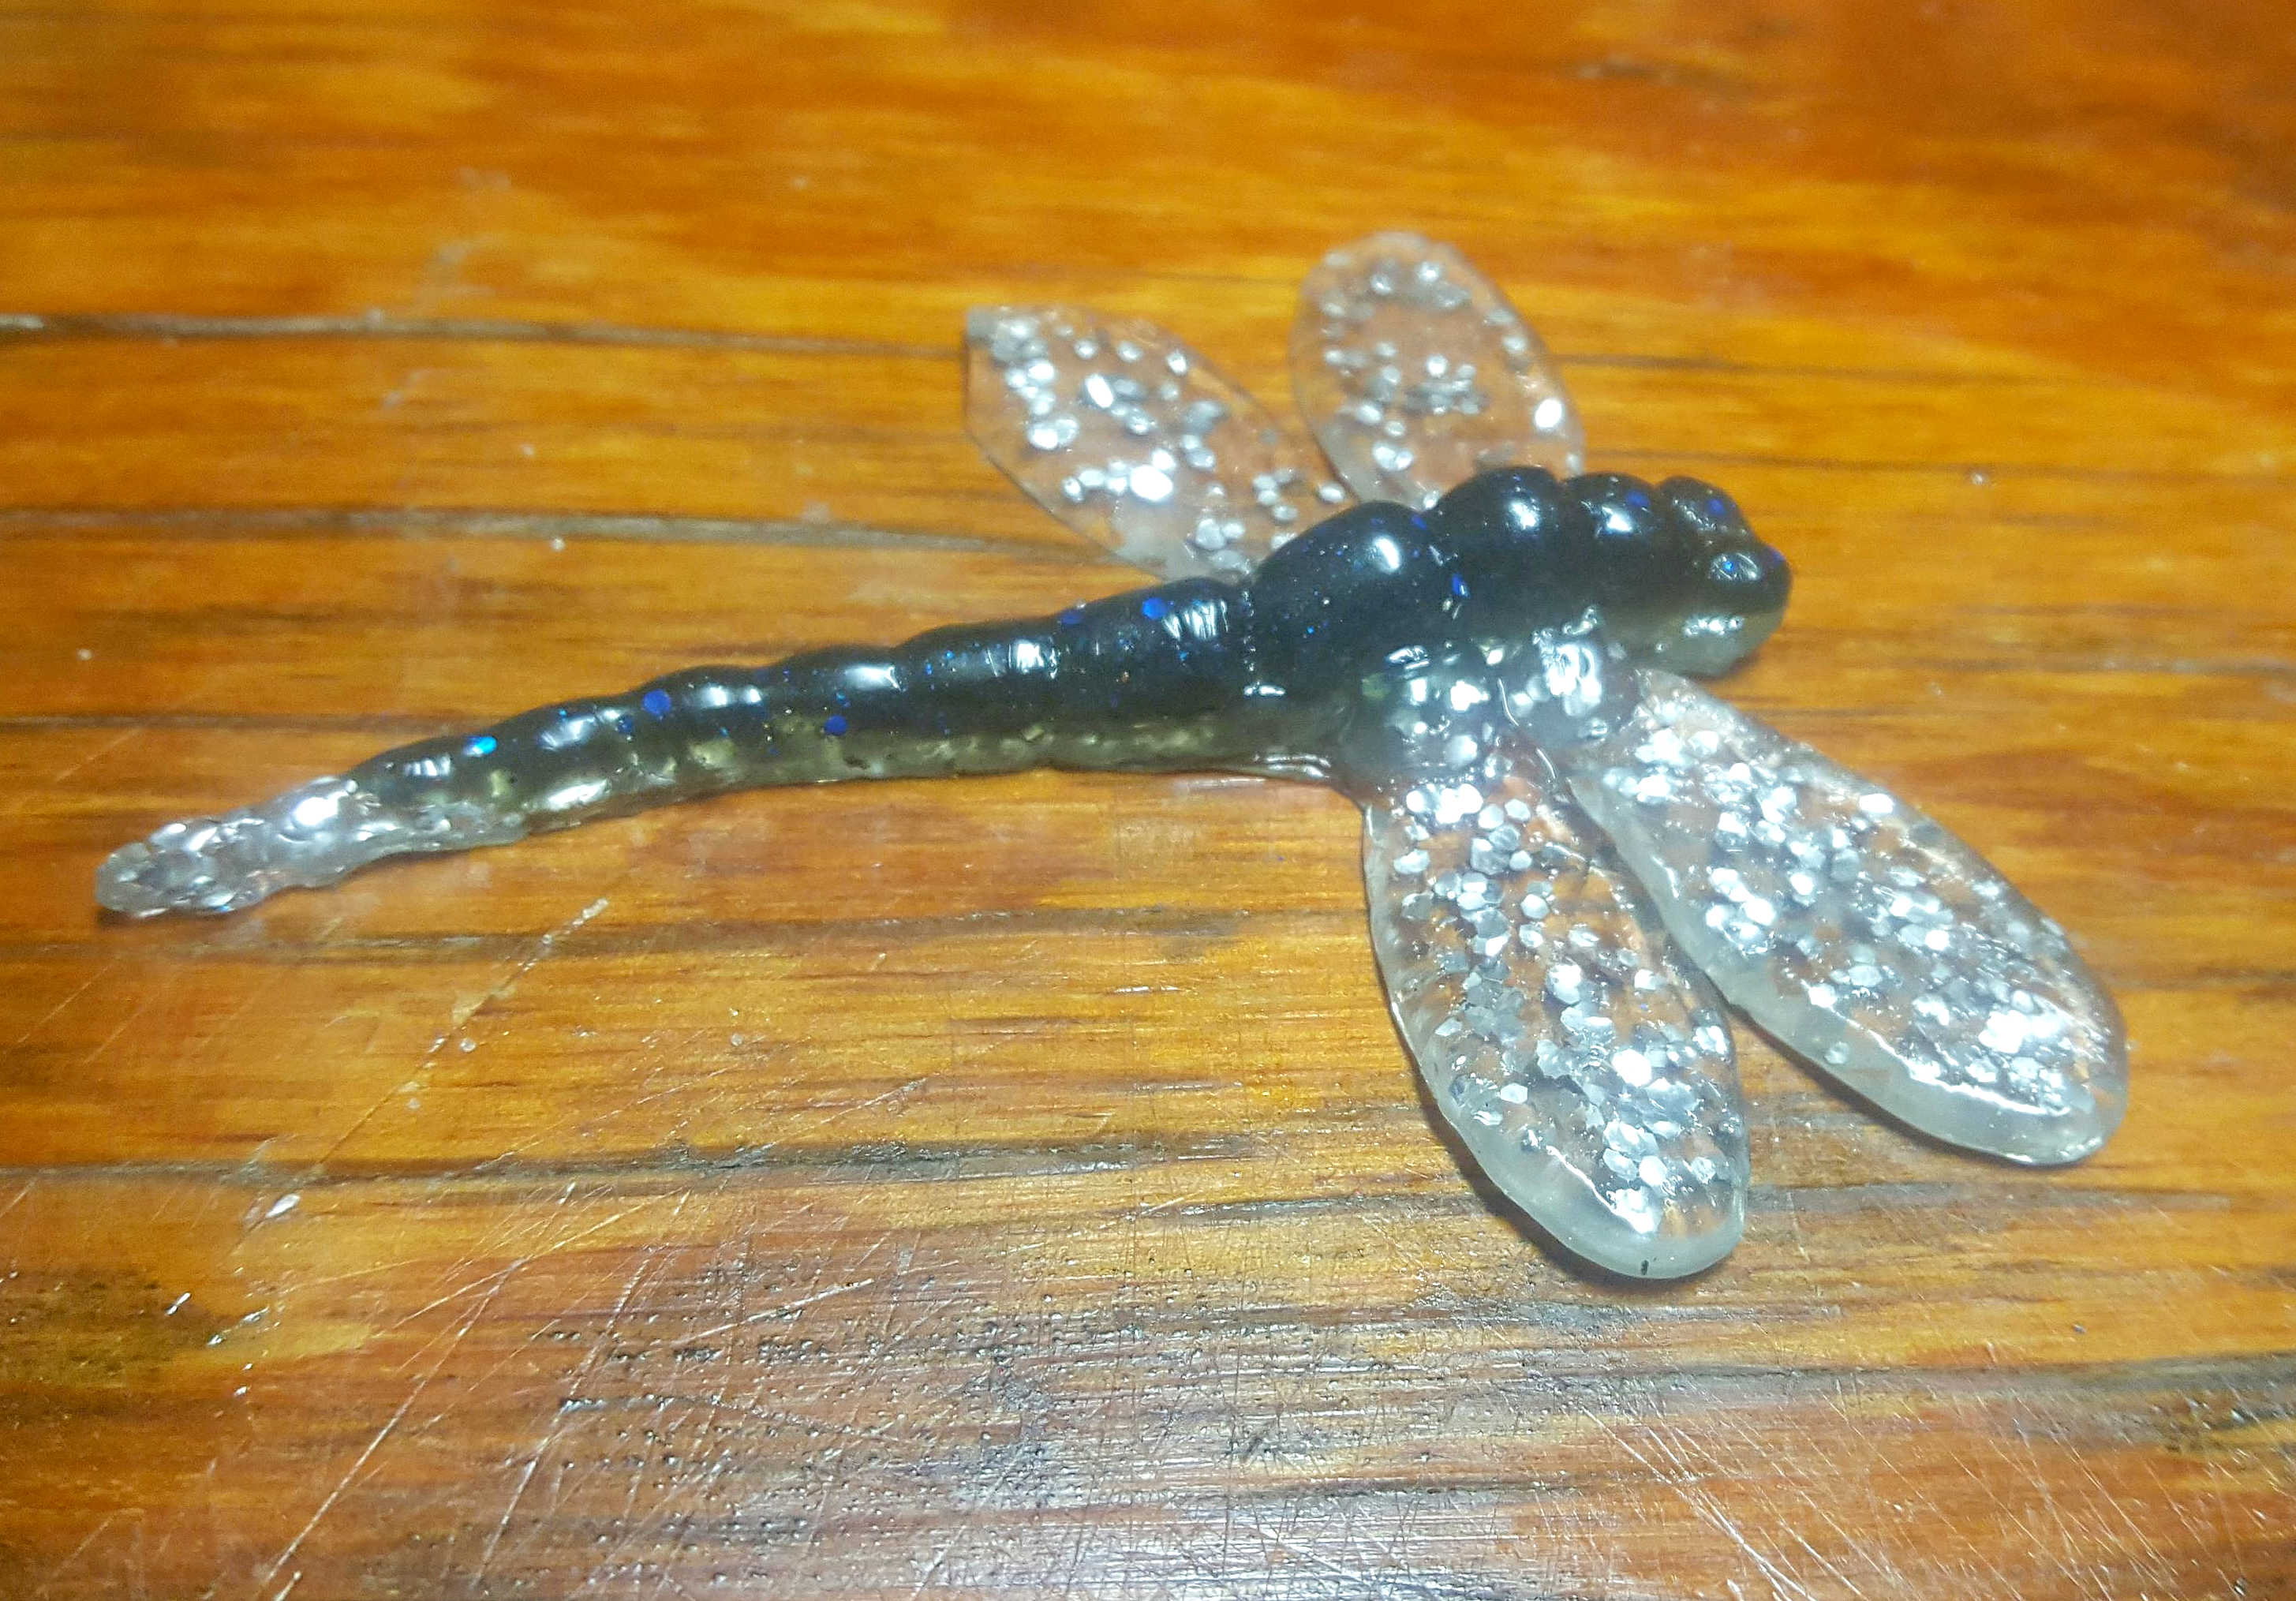 I can't find a Dragonfly topwater lure! - Tacklemaking - Bass